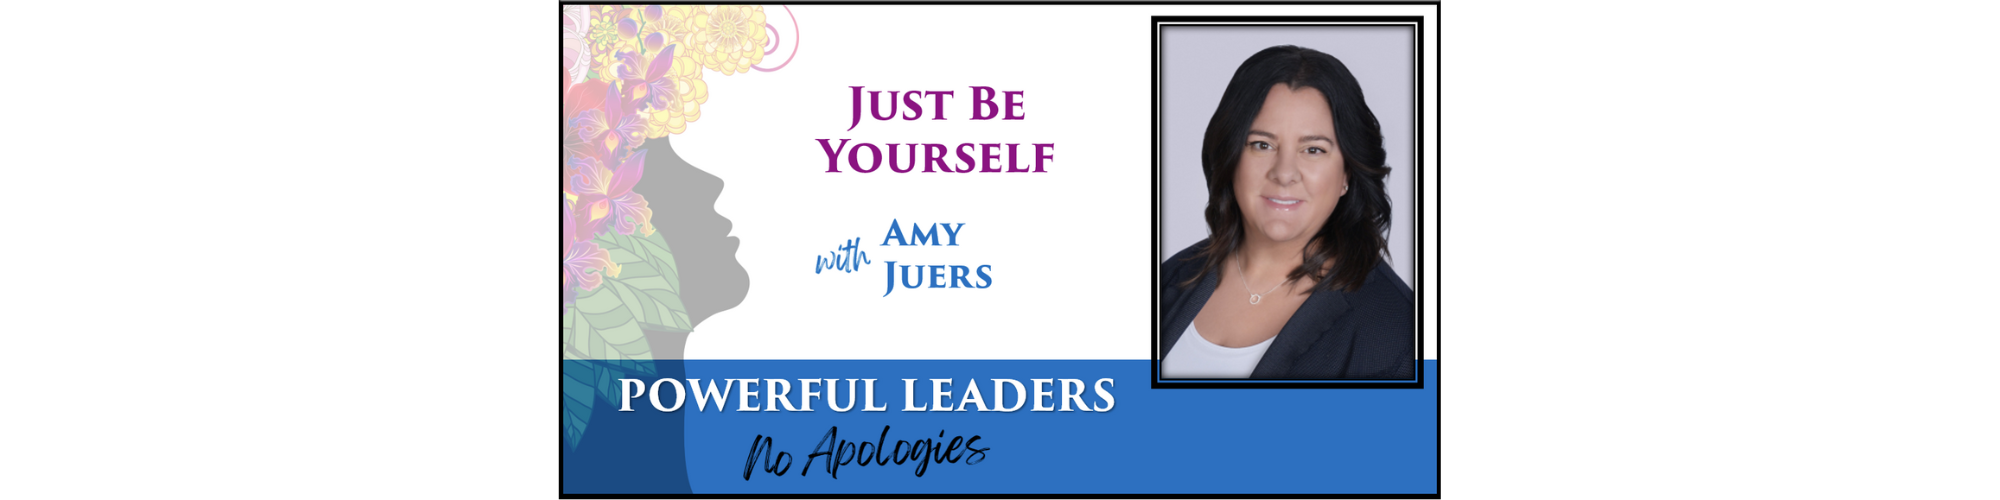 Powerful Leaders, No Apologies Episode 15 Podcast Banner